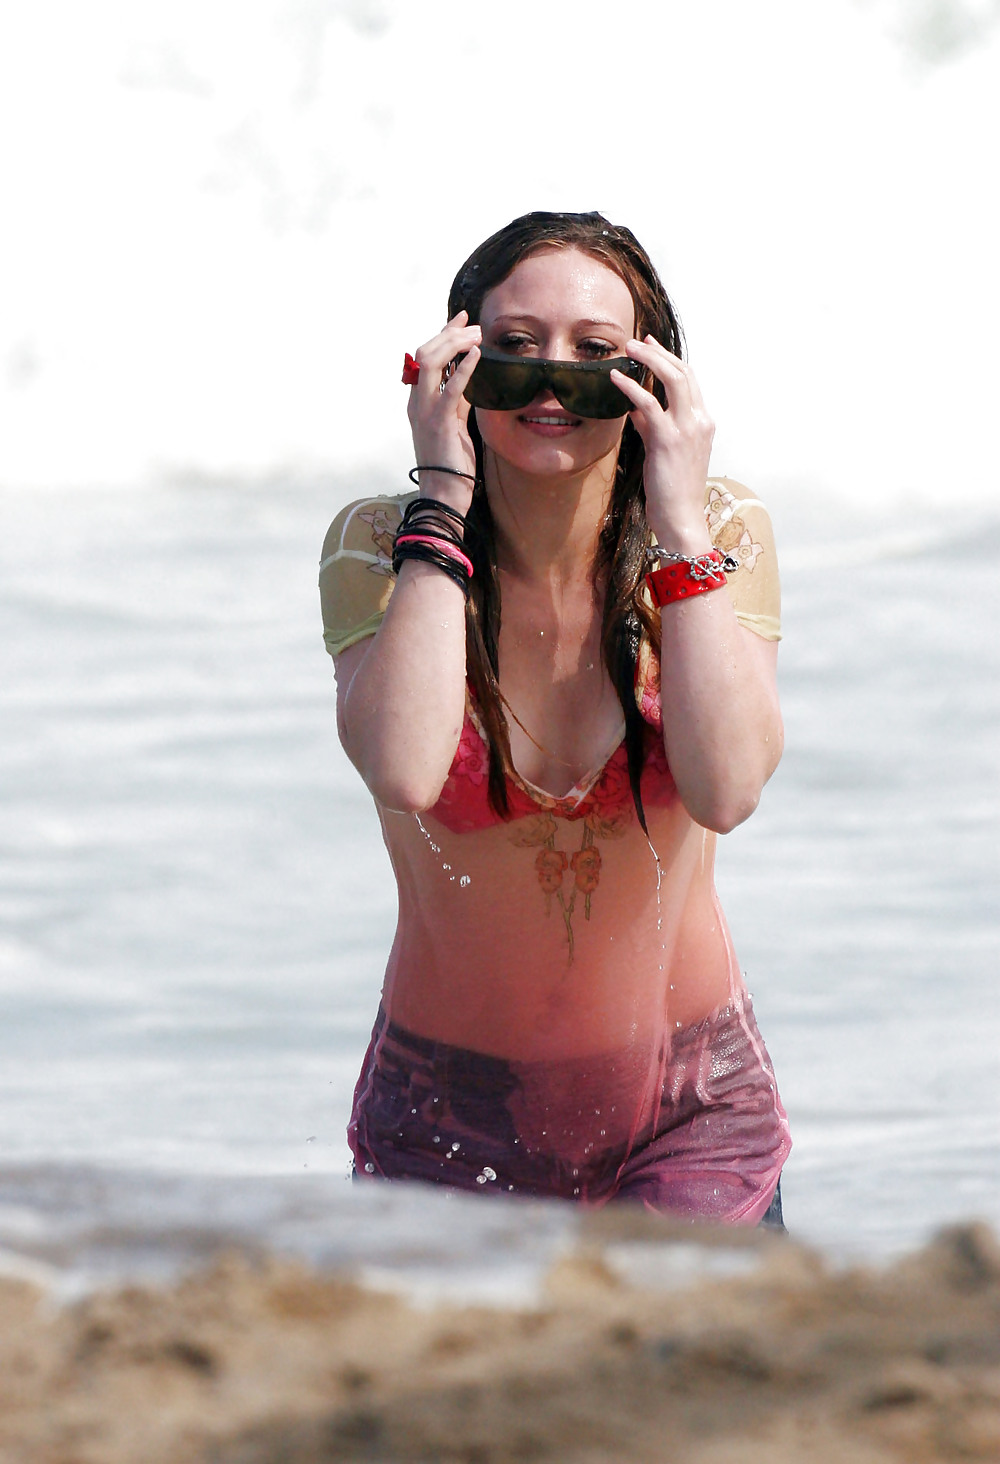 Hilary Duff at the Beach playing around in a wet shirt #7220887